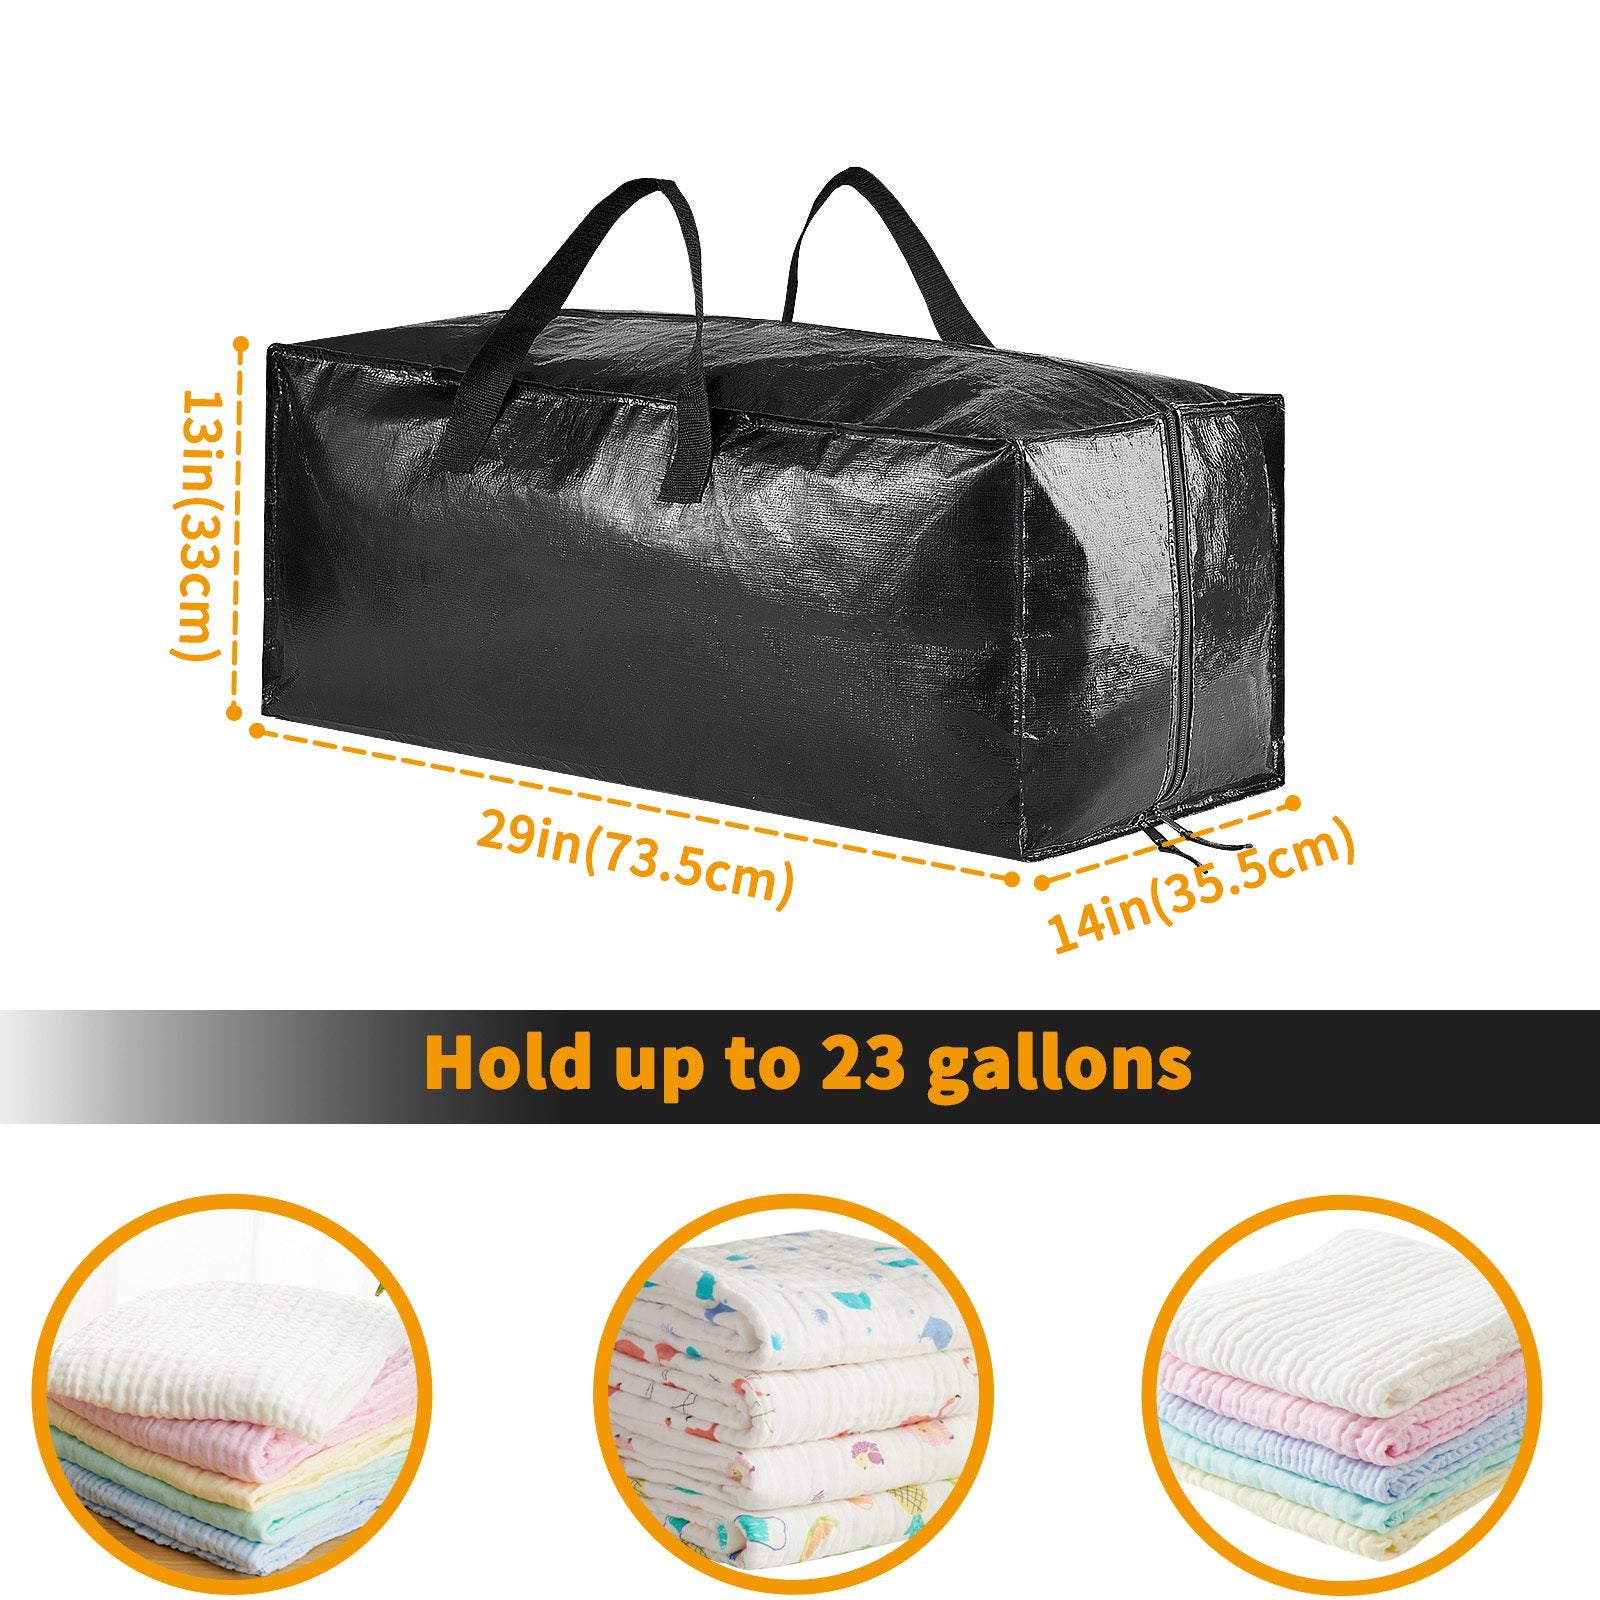 Extra Large Moving Bags Heavy Duty Totes for Storage Packing, Space Saving,  Traveling, with Zippers & Strong Carrying Handles (Set of 8)